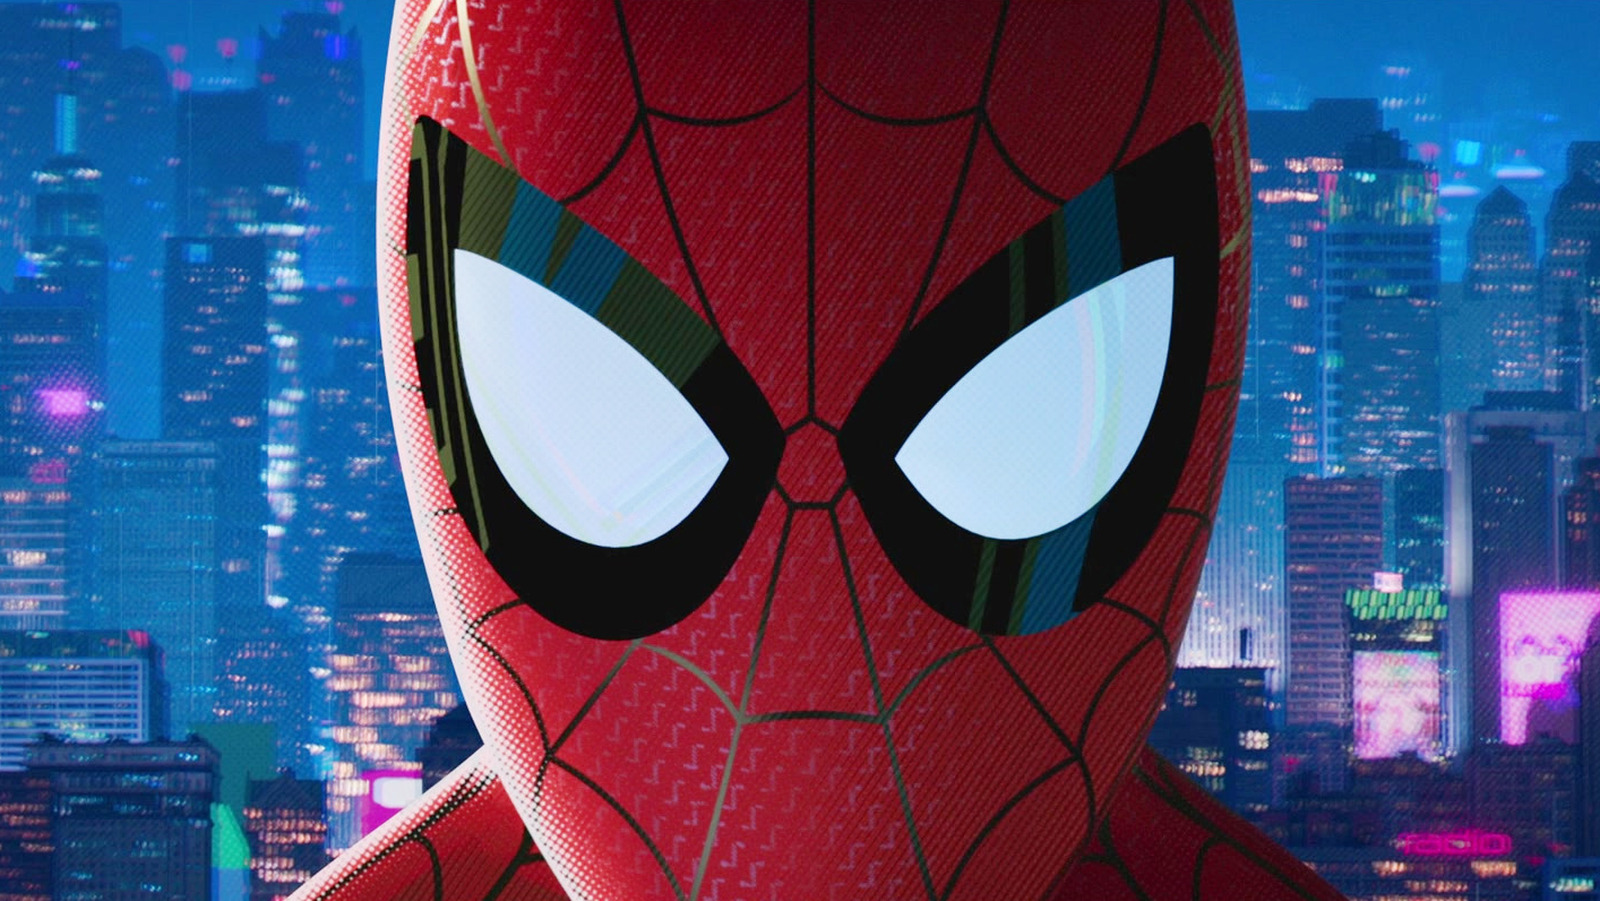 Into the Spider-Verse Remains Spider-Man's Most Impactful Story